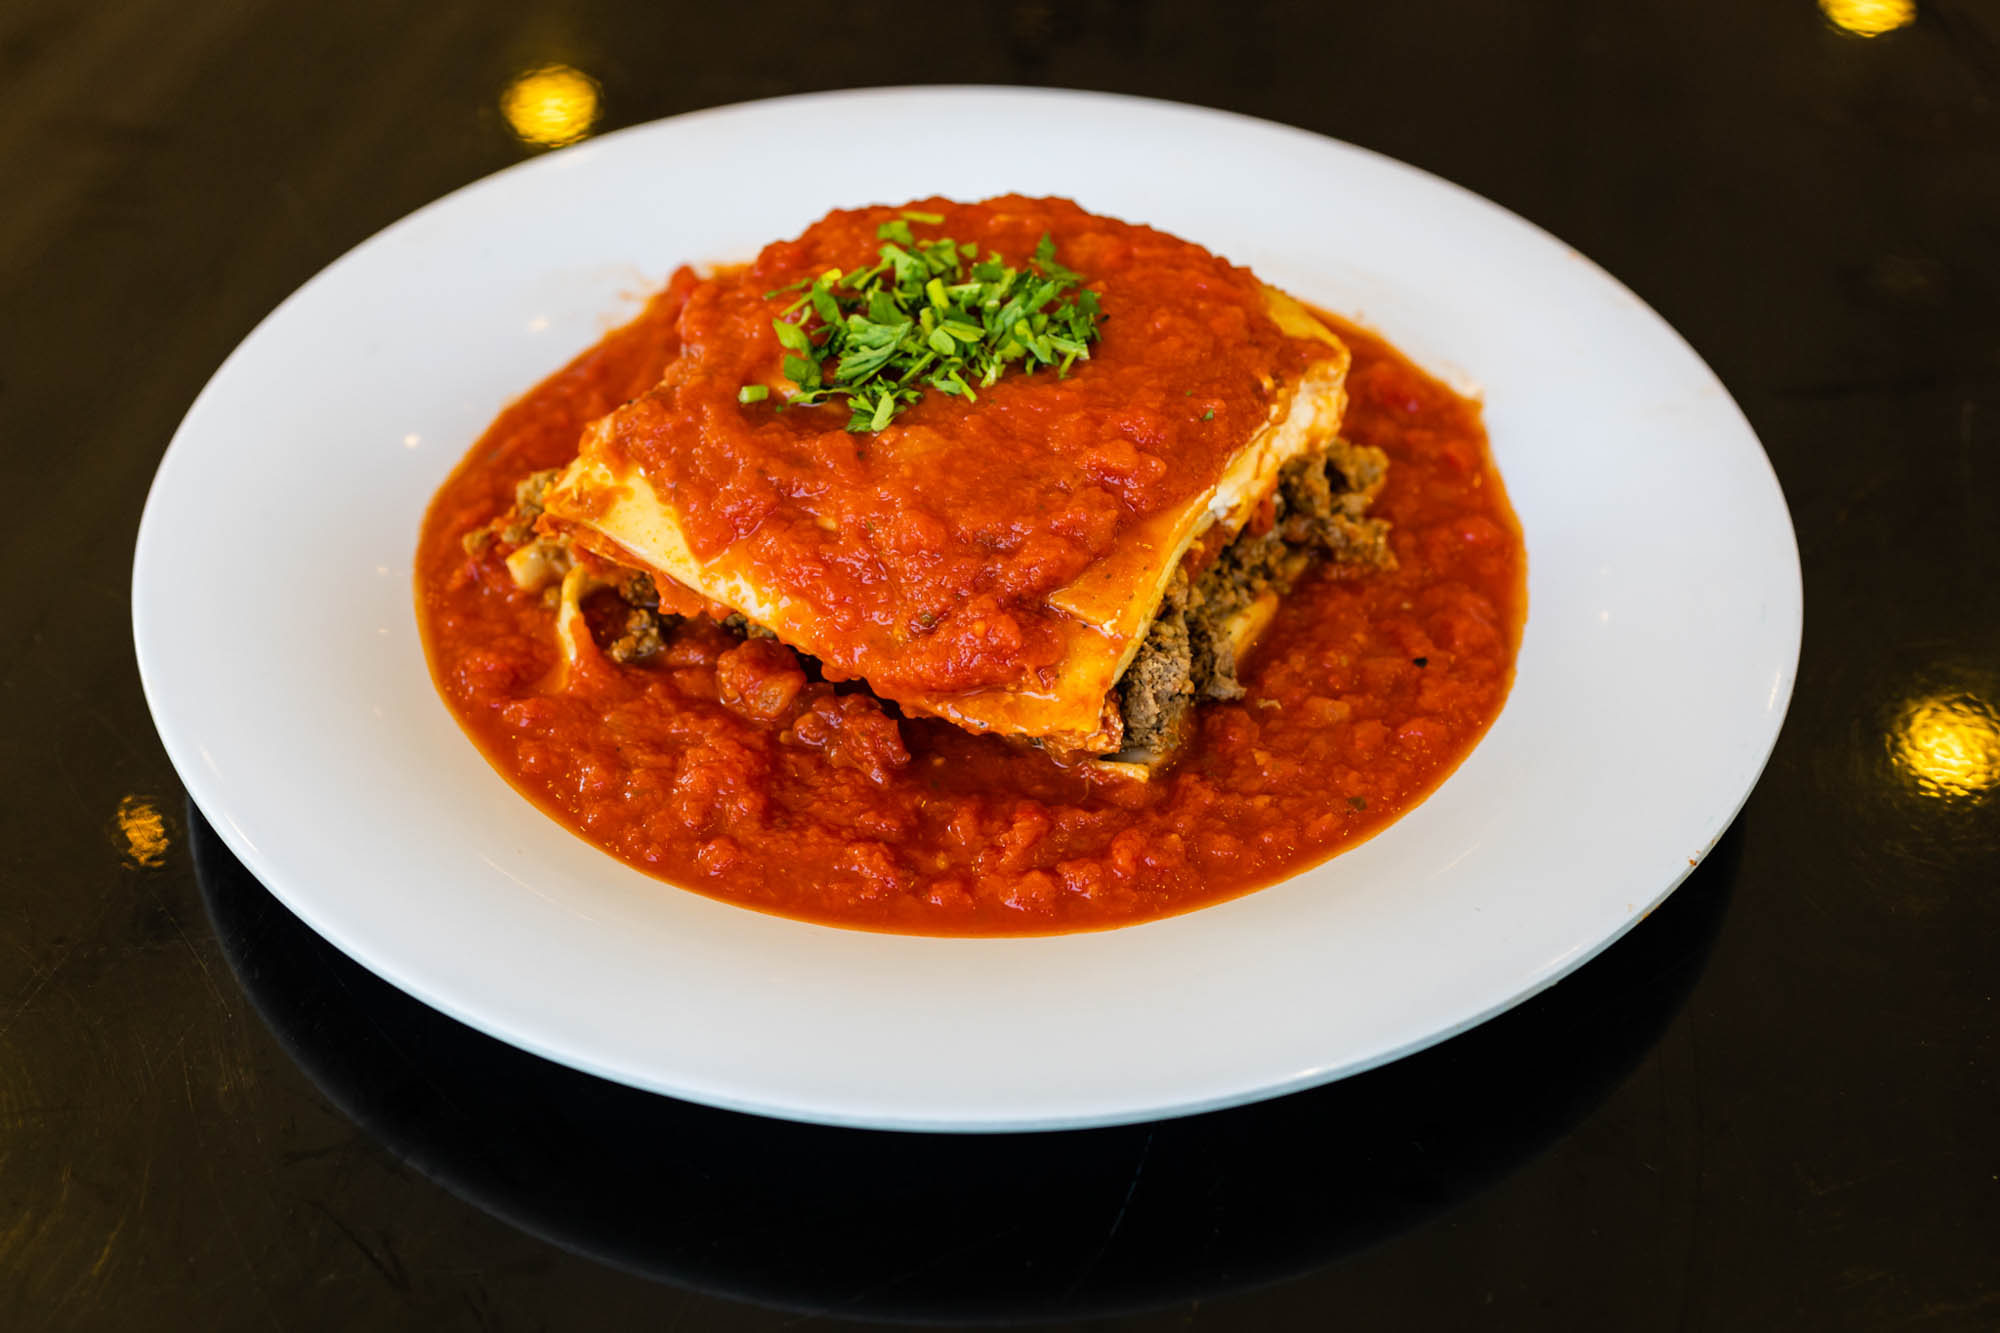 A plate with a piece of lasagna